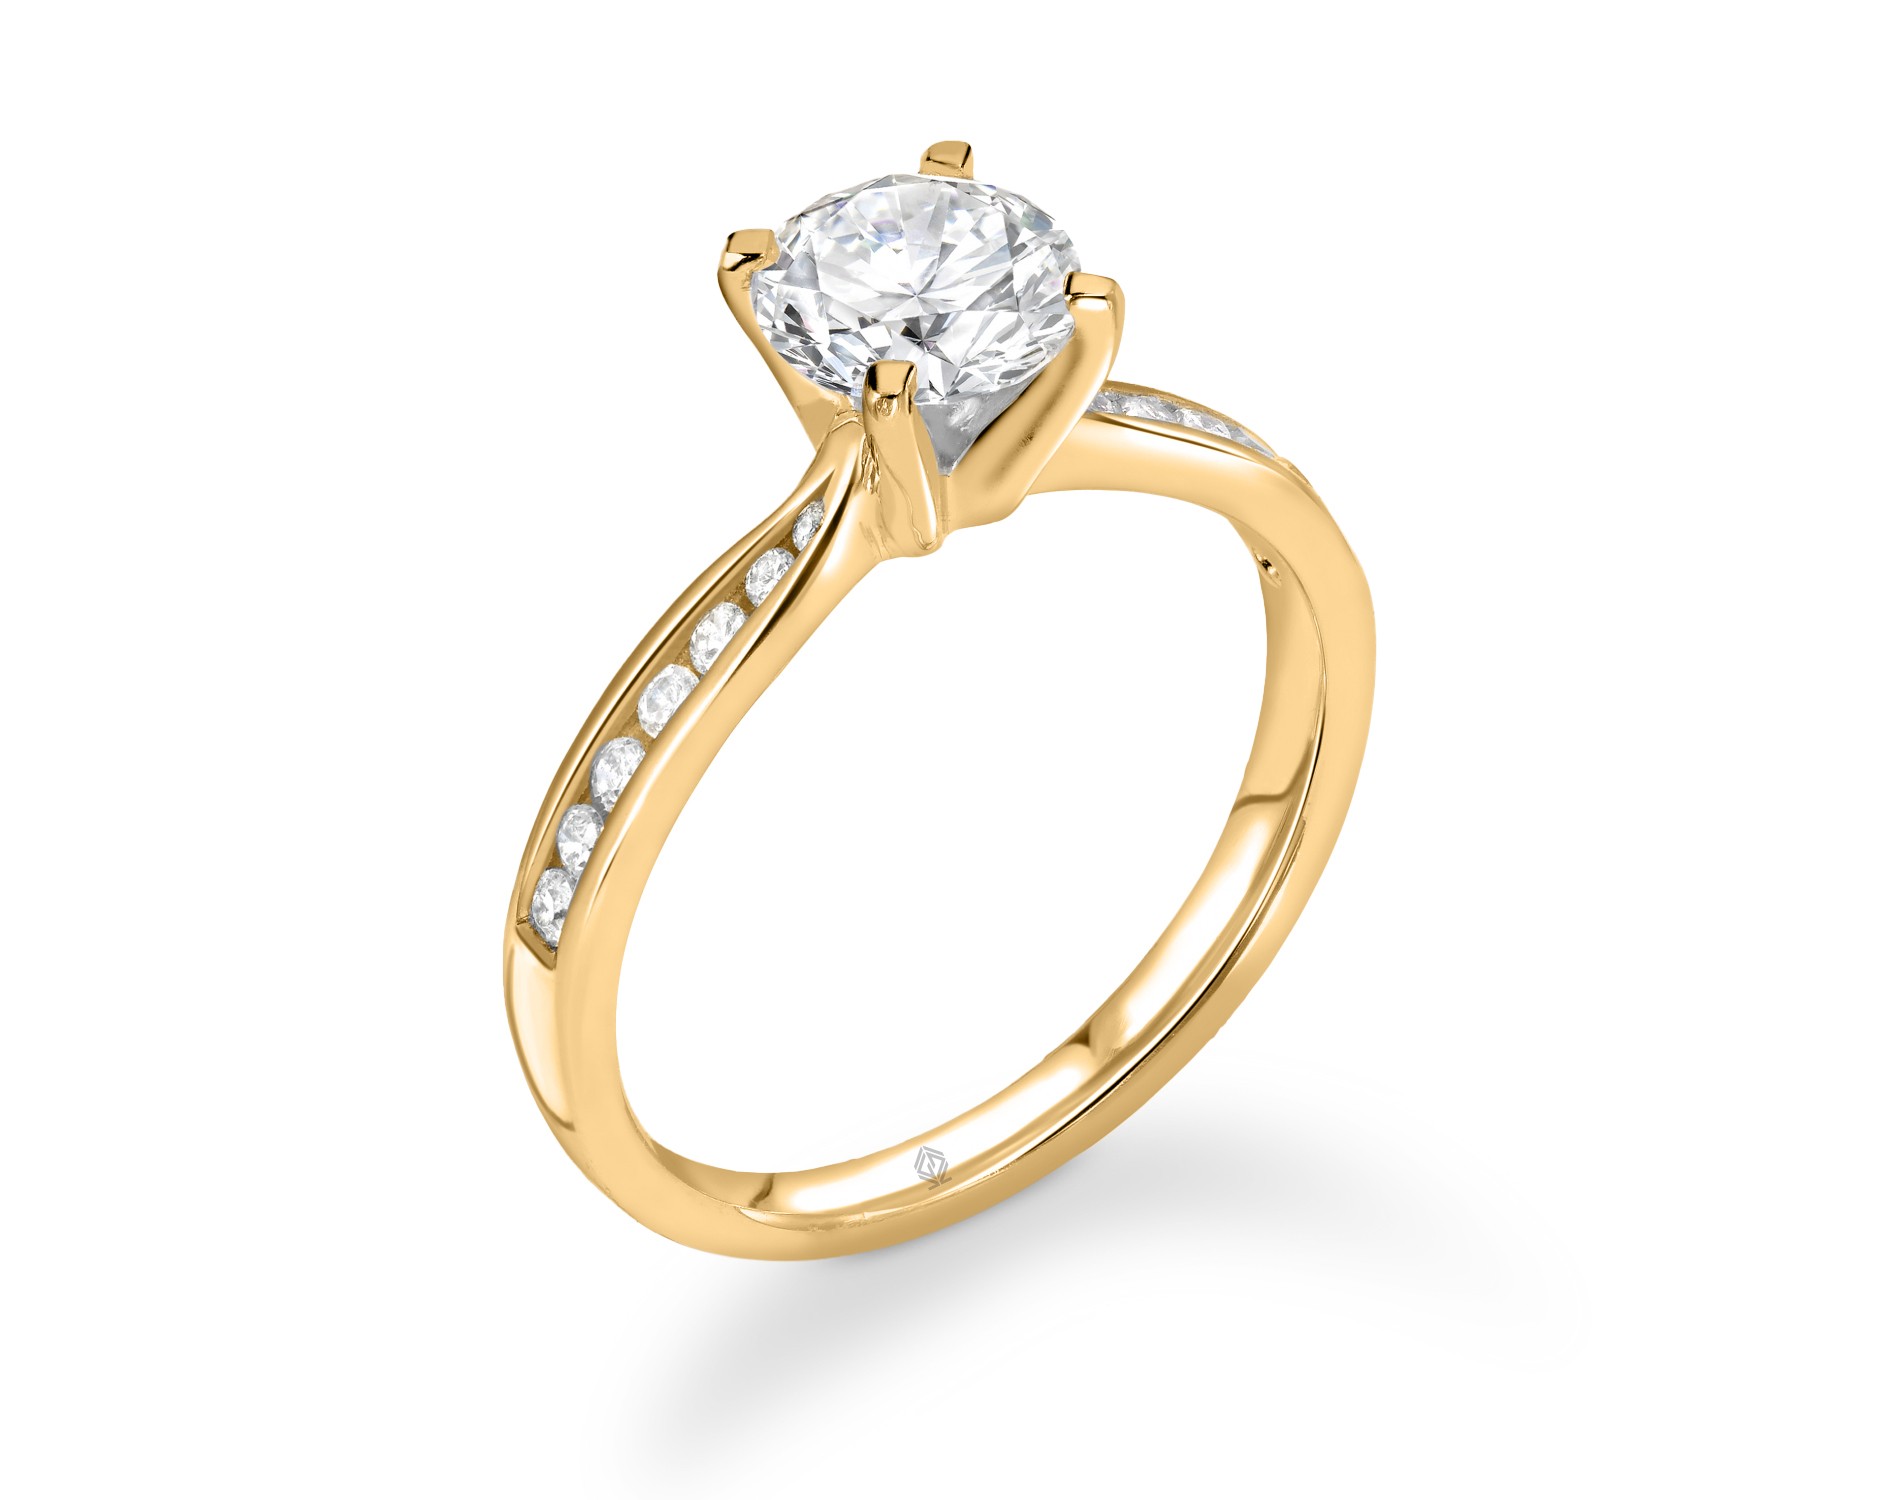 18K YELLOW GOLD 4 PRONGS ROUND CUT DIAMOND ENGAGEMENT RING WITH SIDE STONES CHANNEL SET